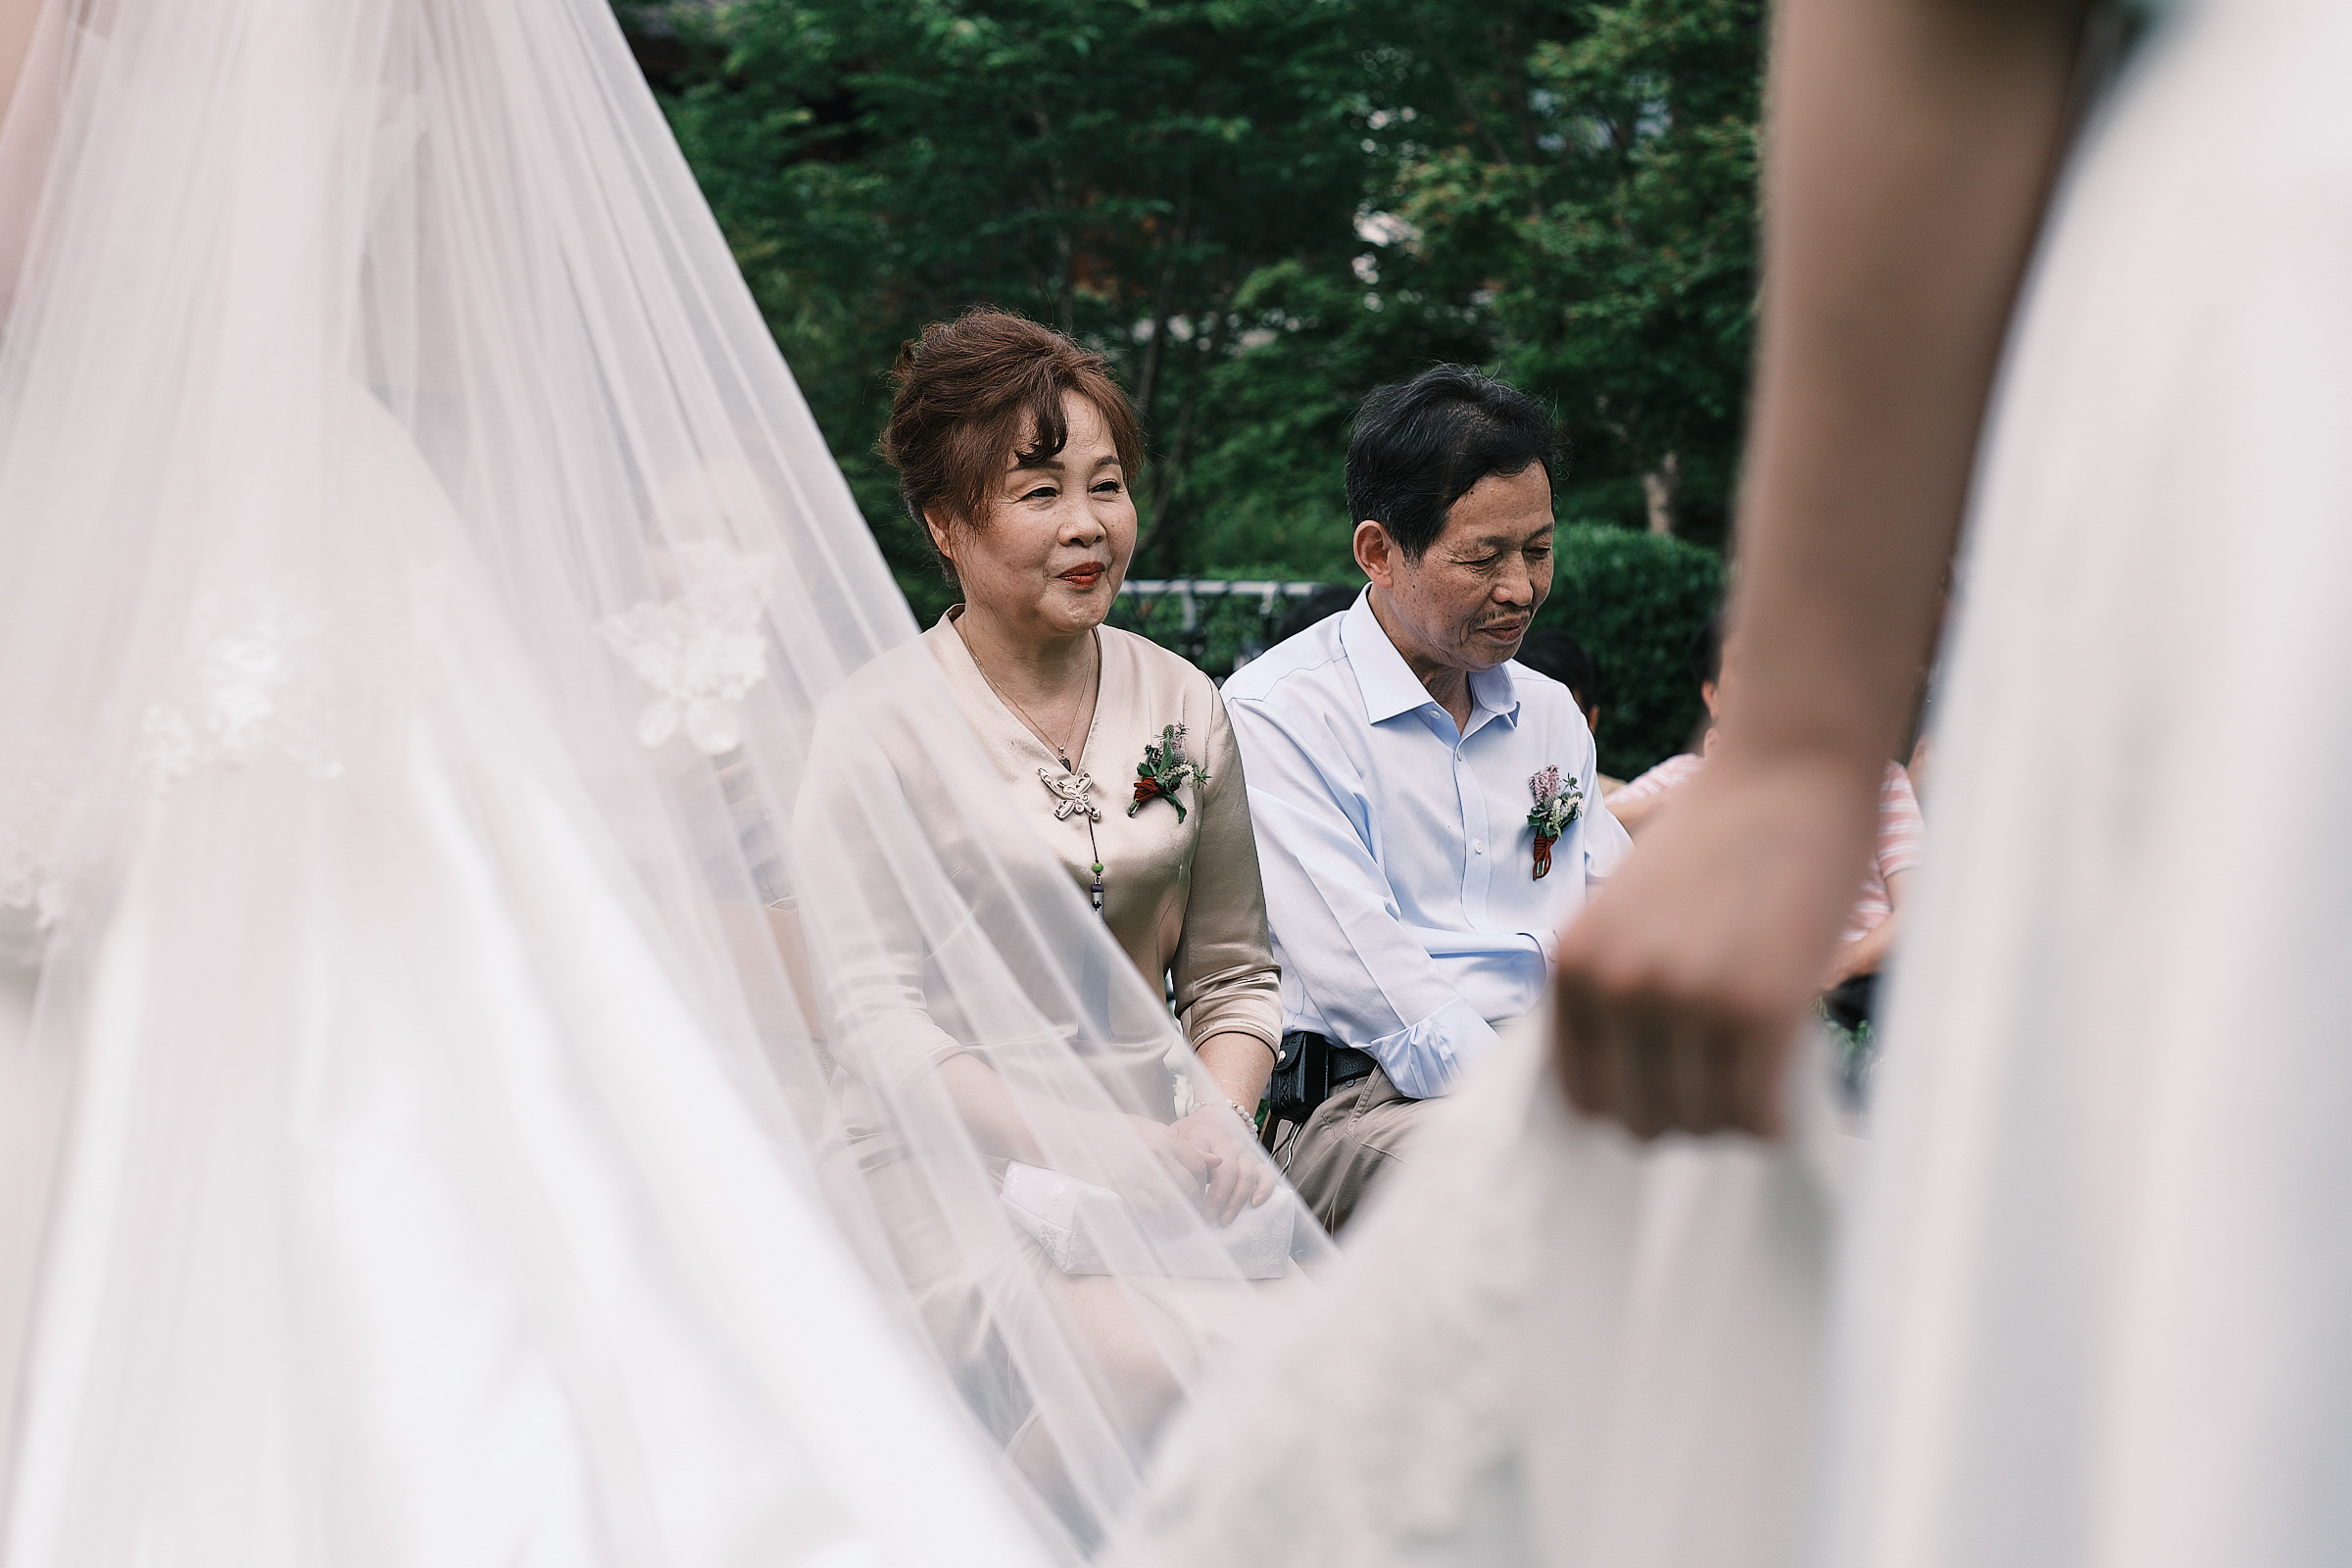 father and mother of groom framed by the hand of the bridesmaid holding the dress of the bride in hangzhou china